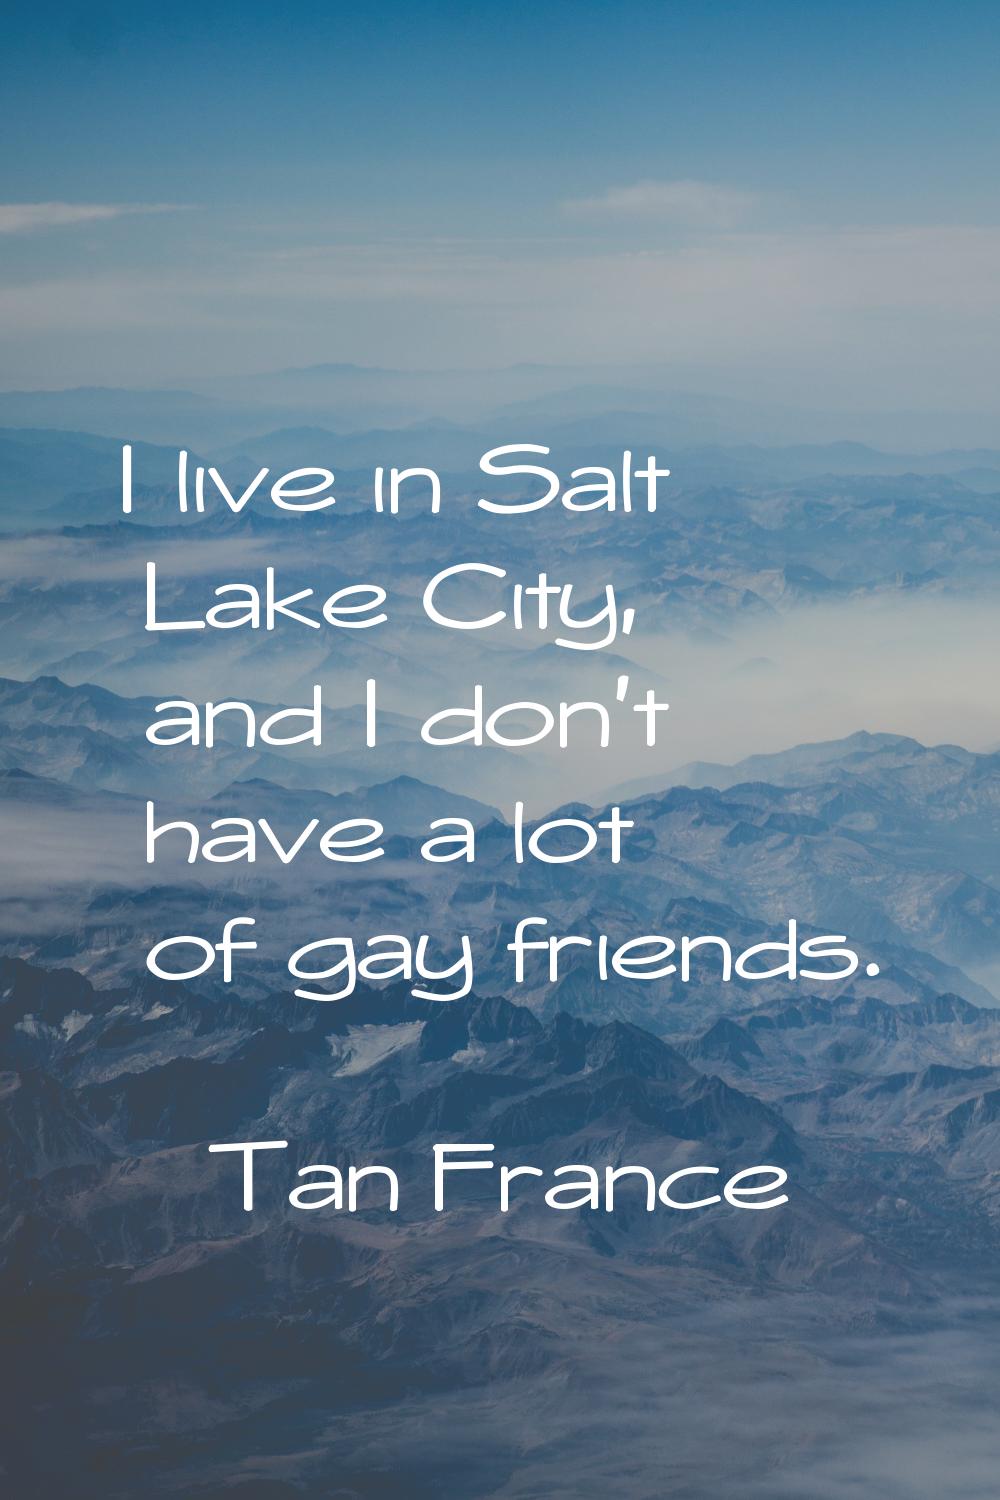 I live in Salt Lake City, and I don't have a lot of gay friends.